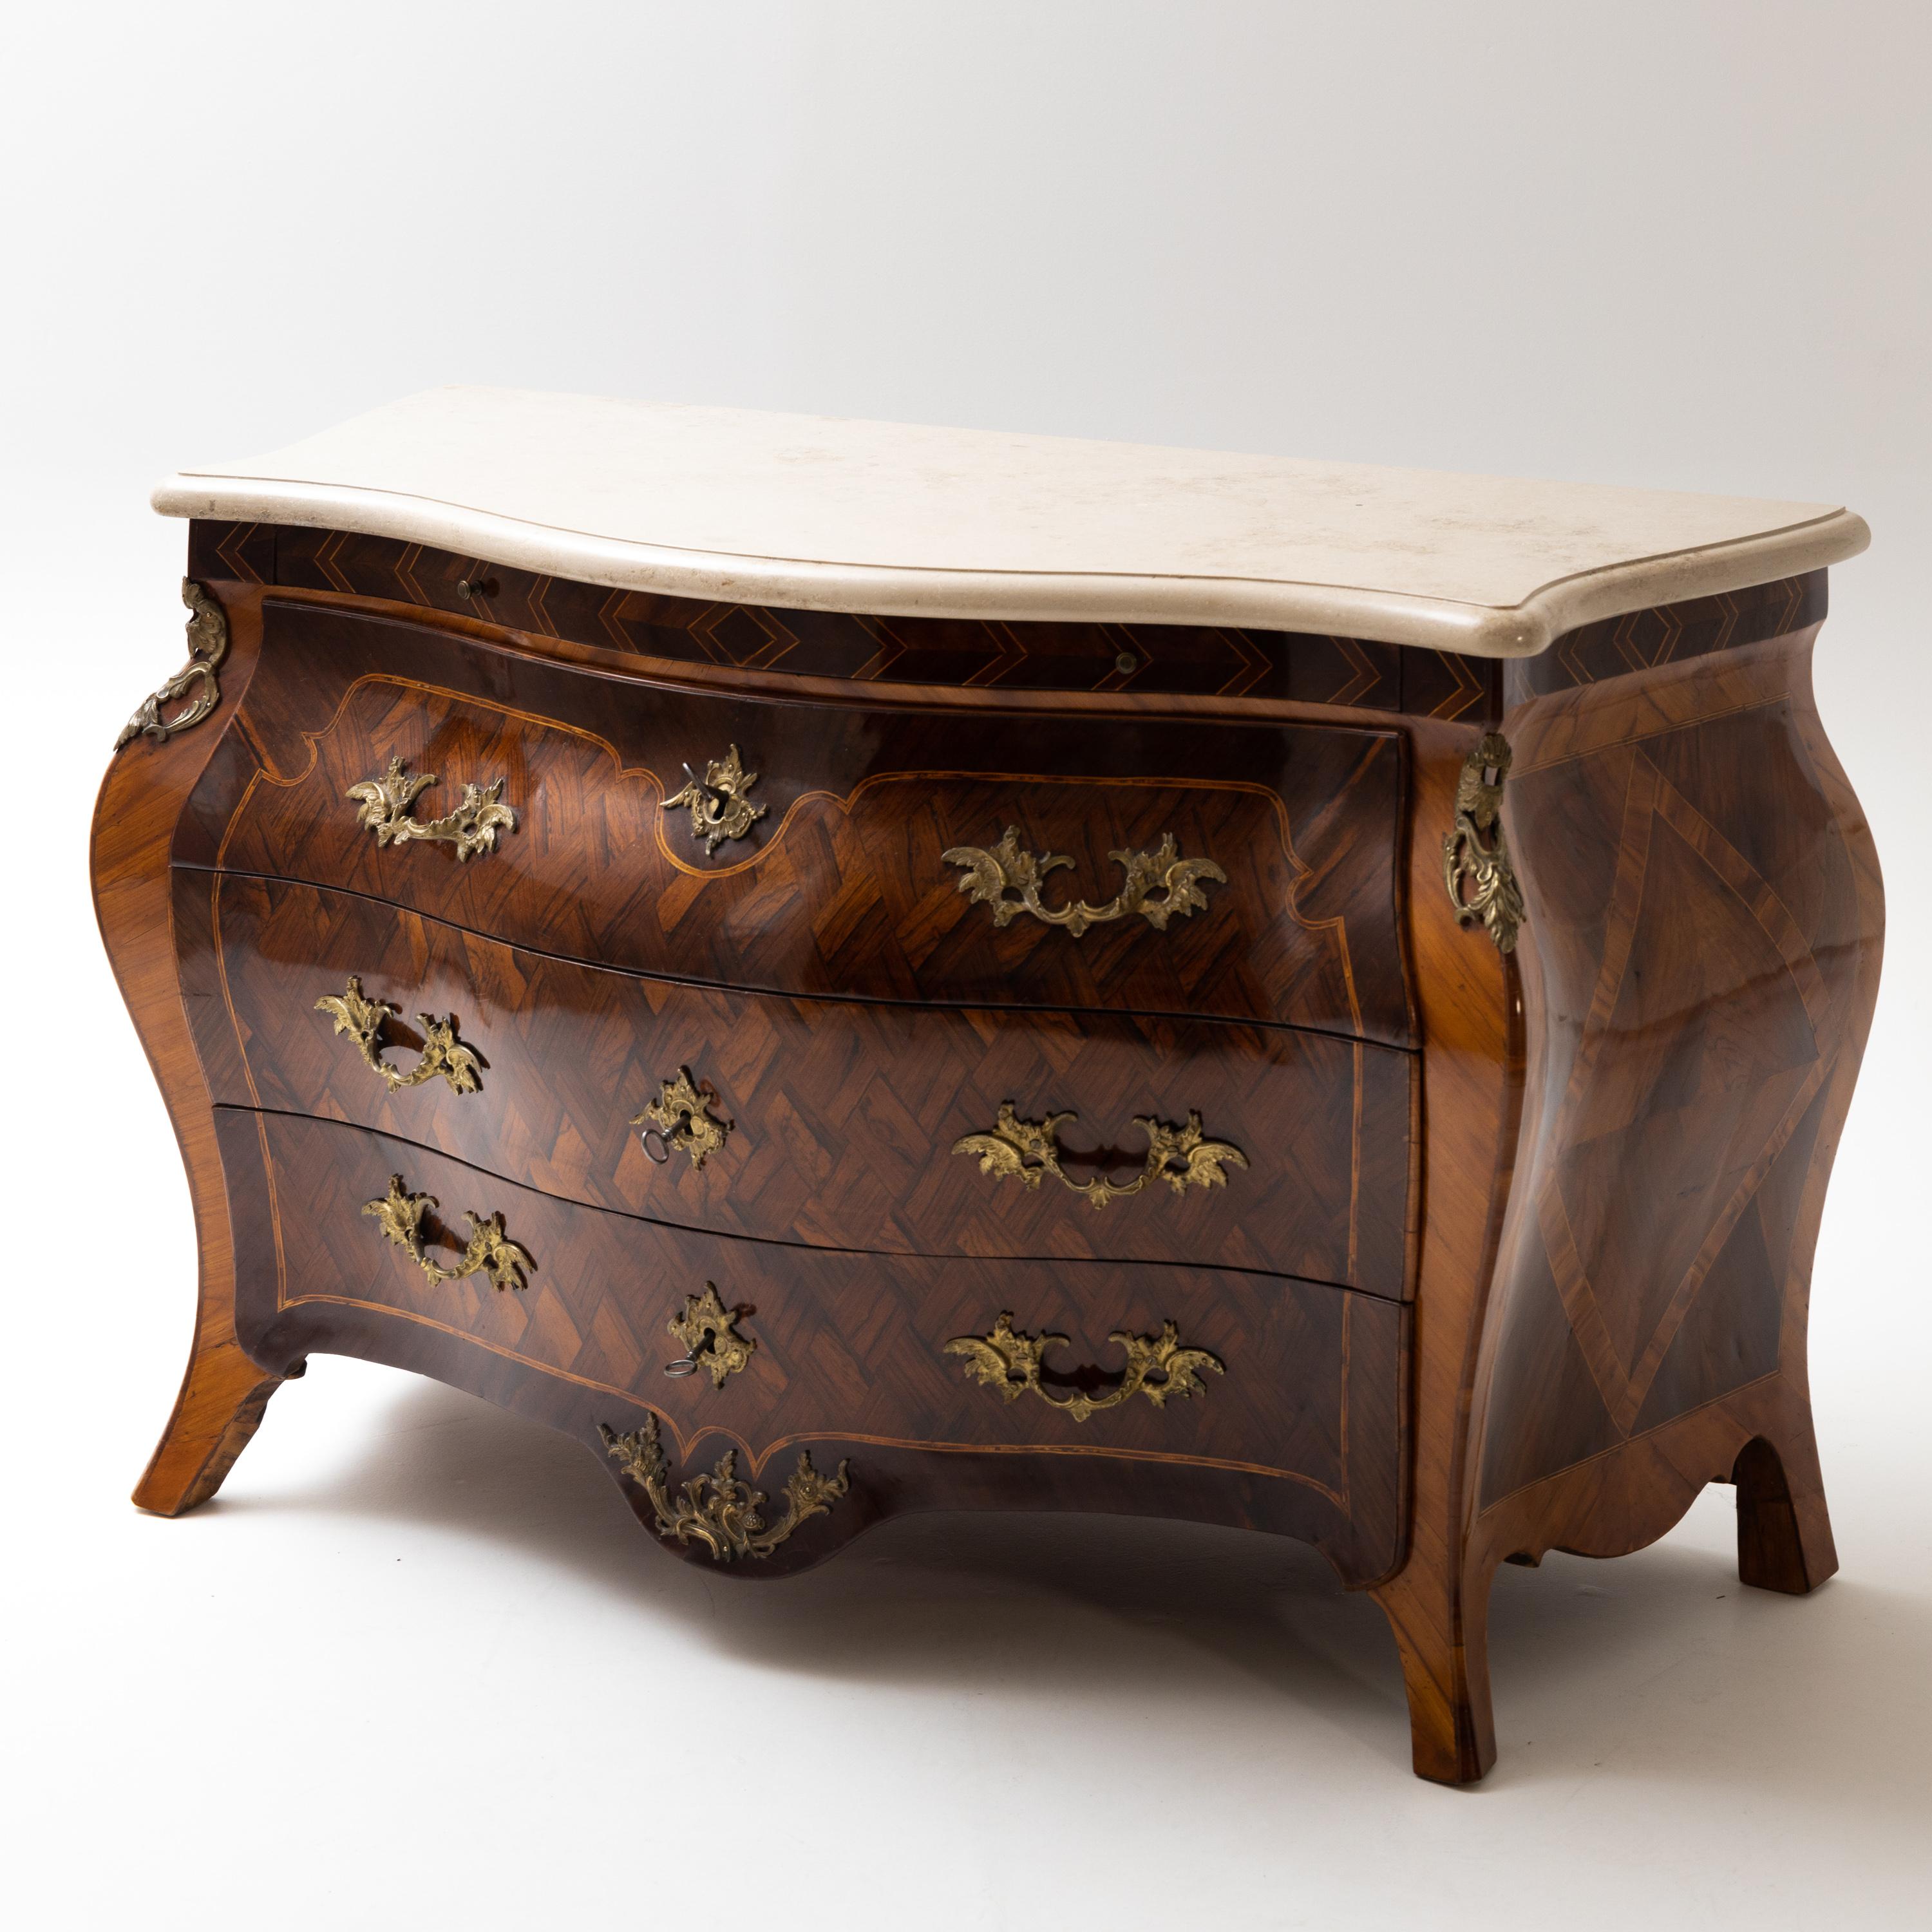 Large walnut veneered baroque commode with cambered trapezoidal body made by Swedish cabinetmaker and ebenist Niclas Korp (master 1771). The dresser rests on flared square legs and is covered with a recent stone top. The dresser has three drawers